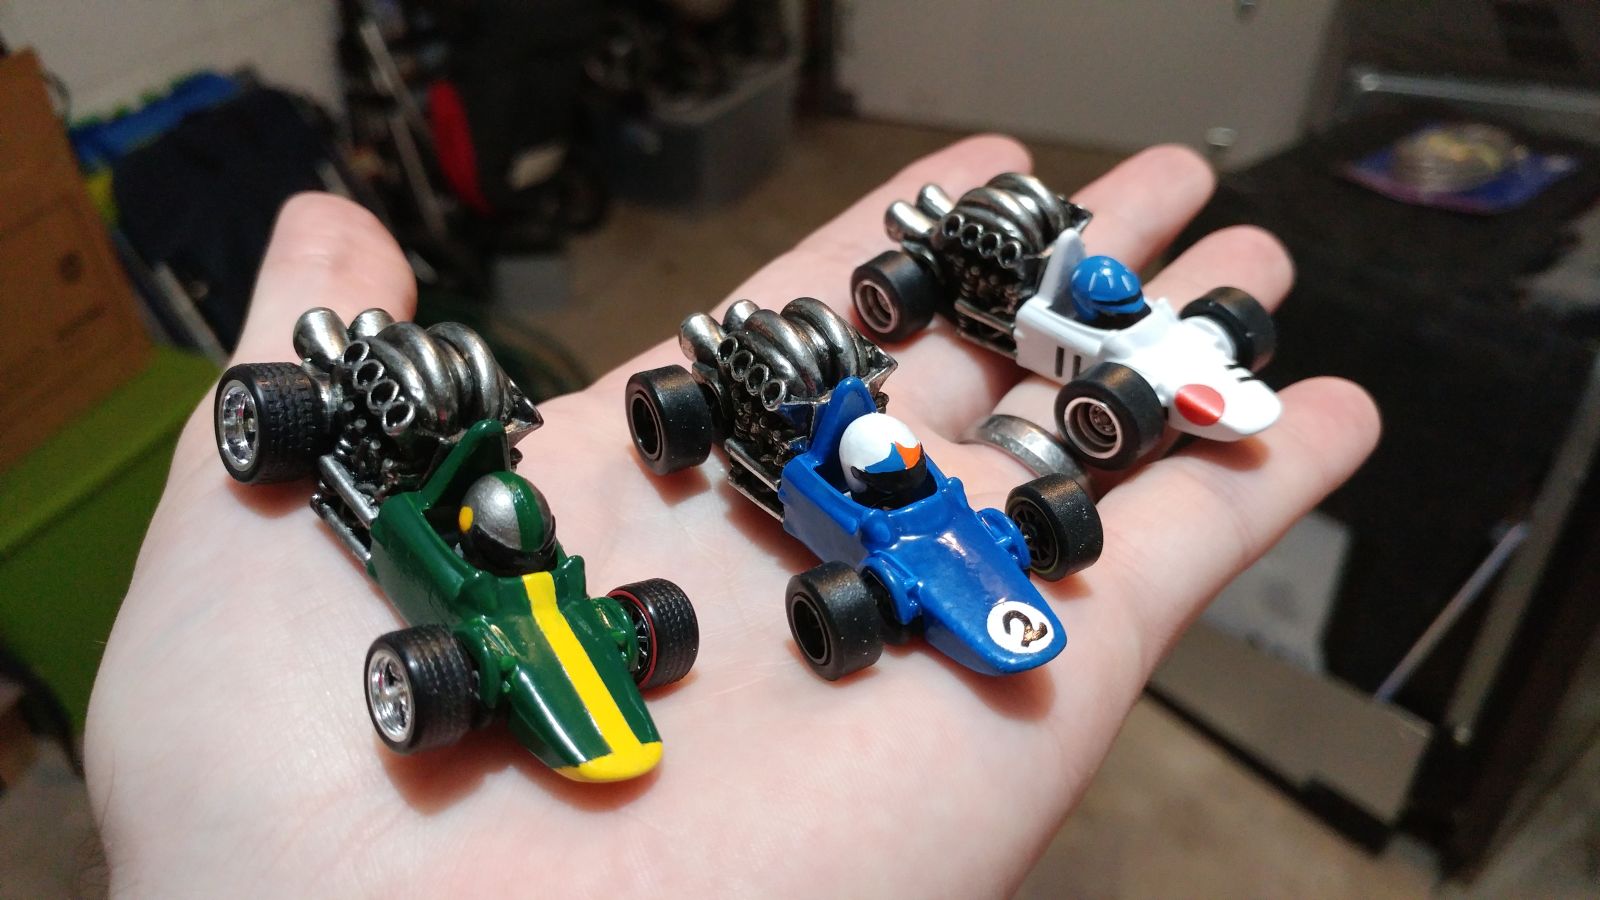 I have since added some meatballs and racing numbers to the “Lotus” and will paint the mirrors on all three of these silver at some point soon.